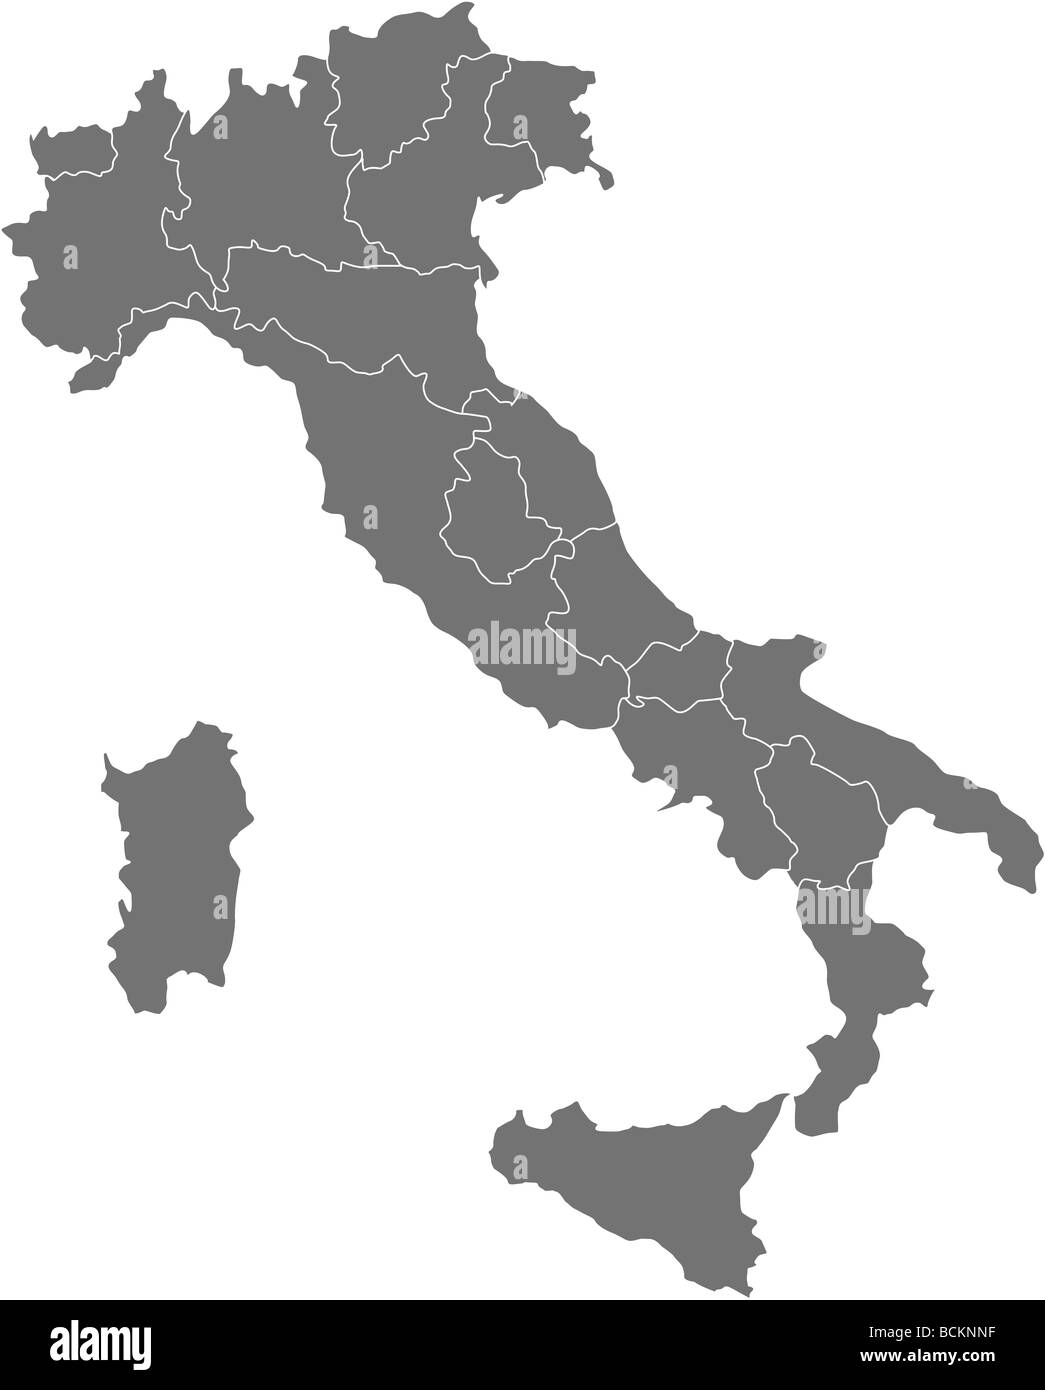 There is a map of Italy country Stock Photo